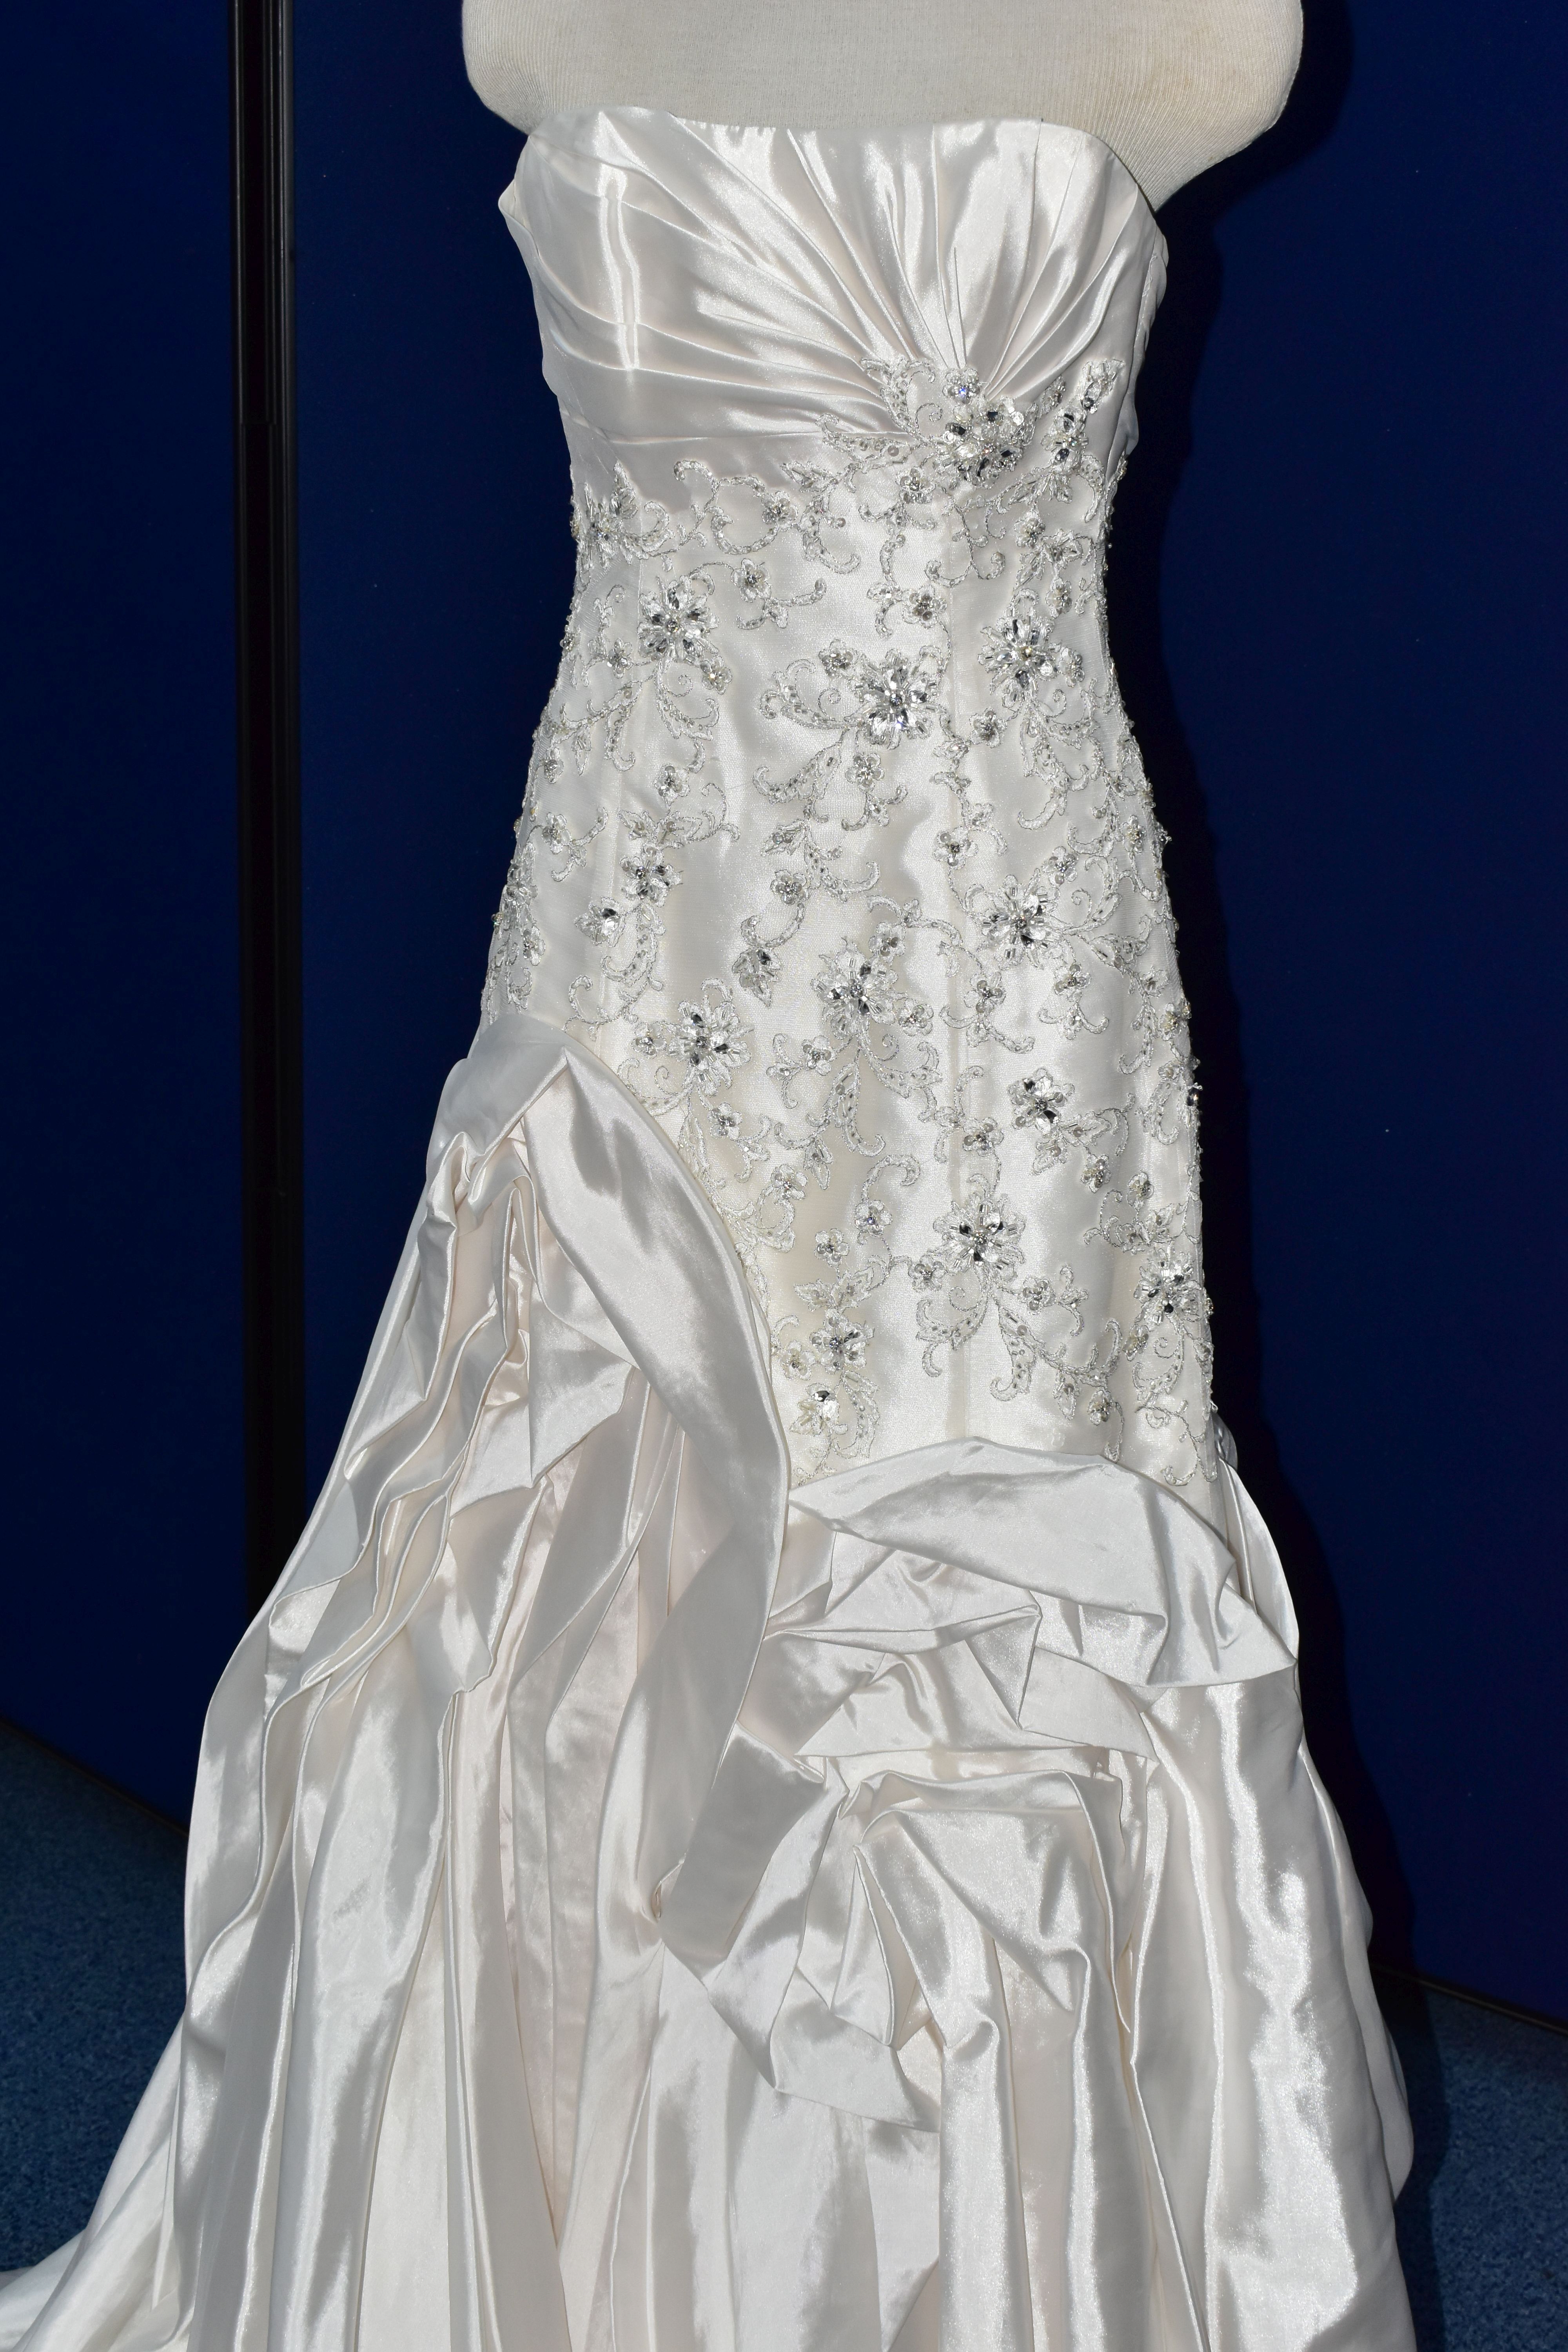 WEDDING GOWN, 'Sophia Tolli', size 10, champagne with satin bodice, pewter beaded appliques (1) - Image 2 of 13